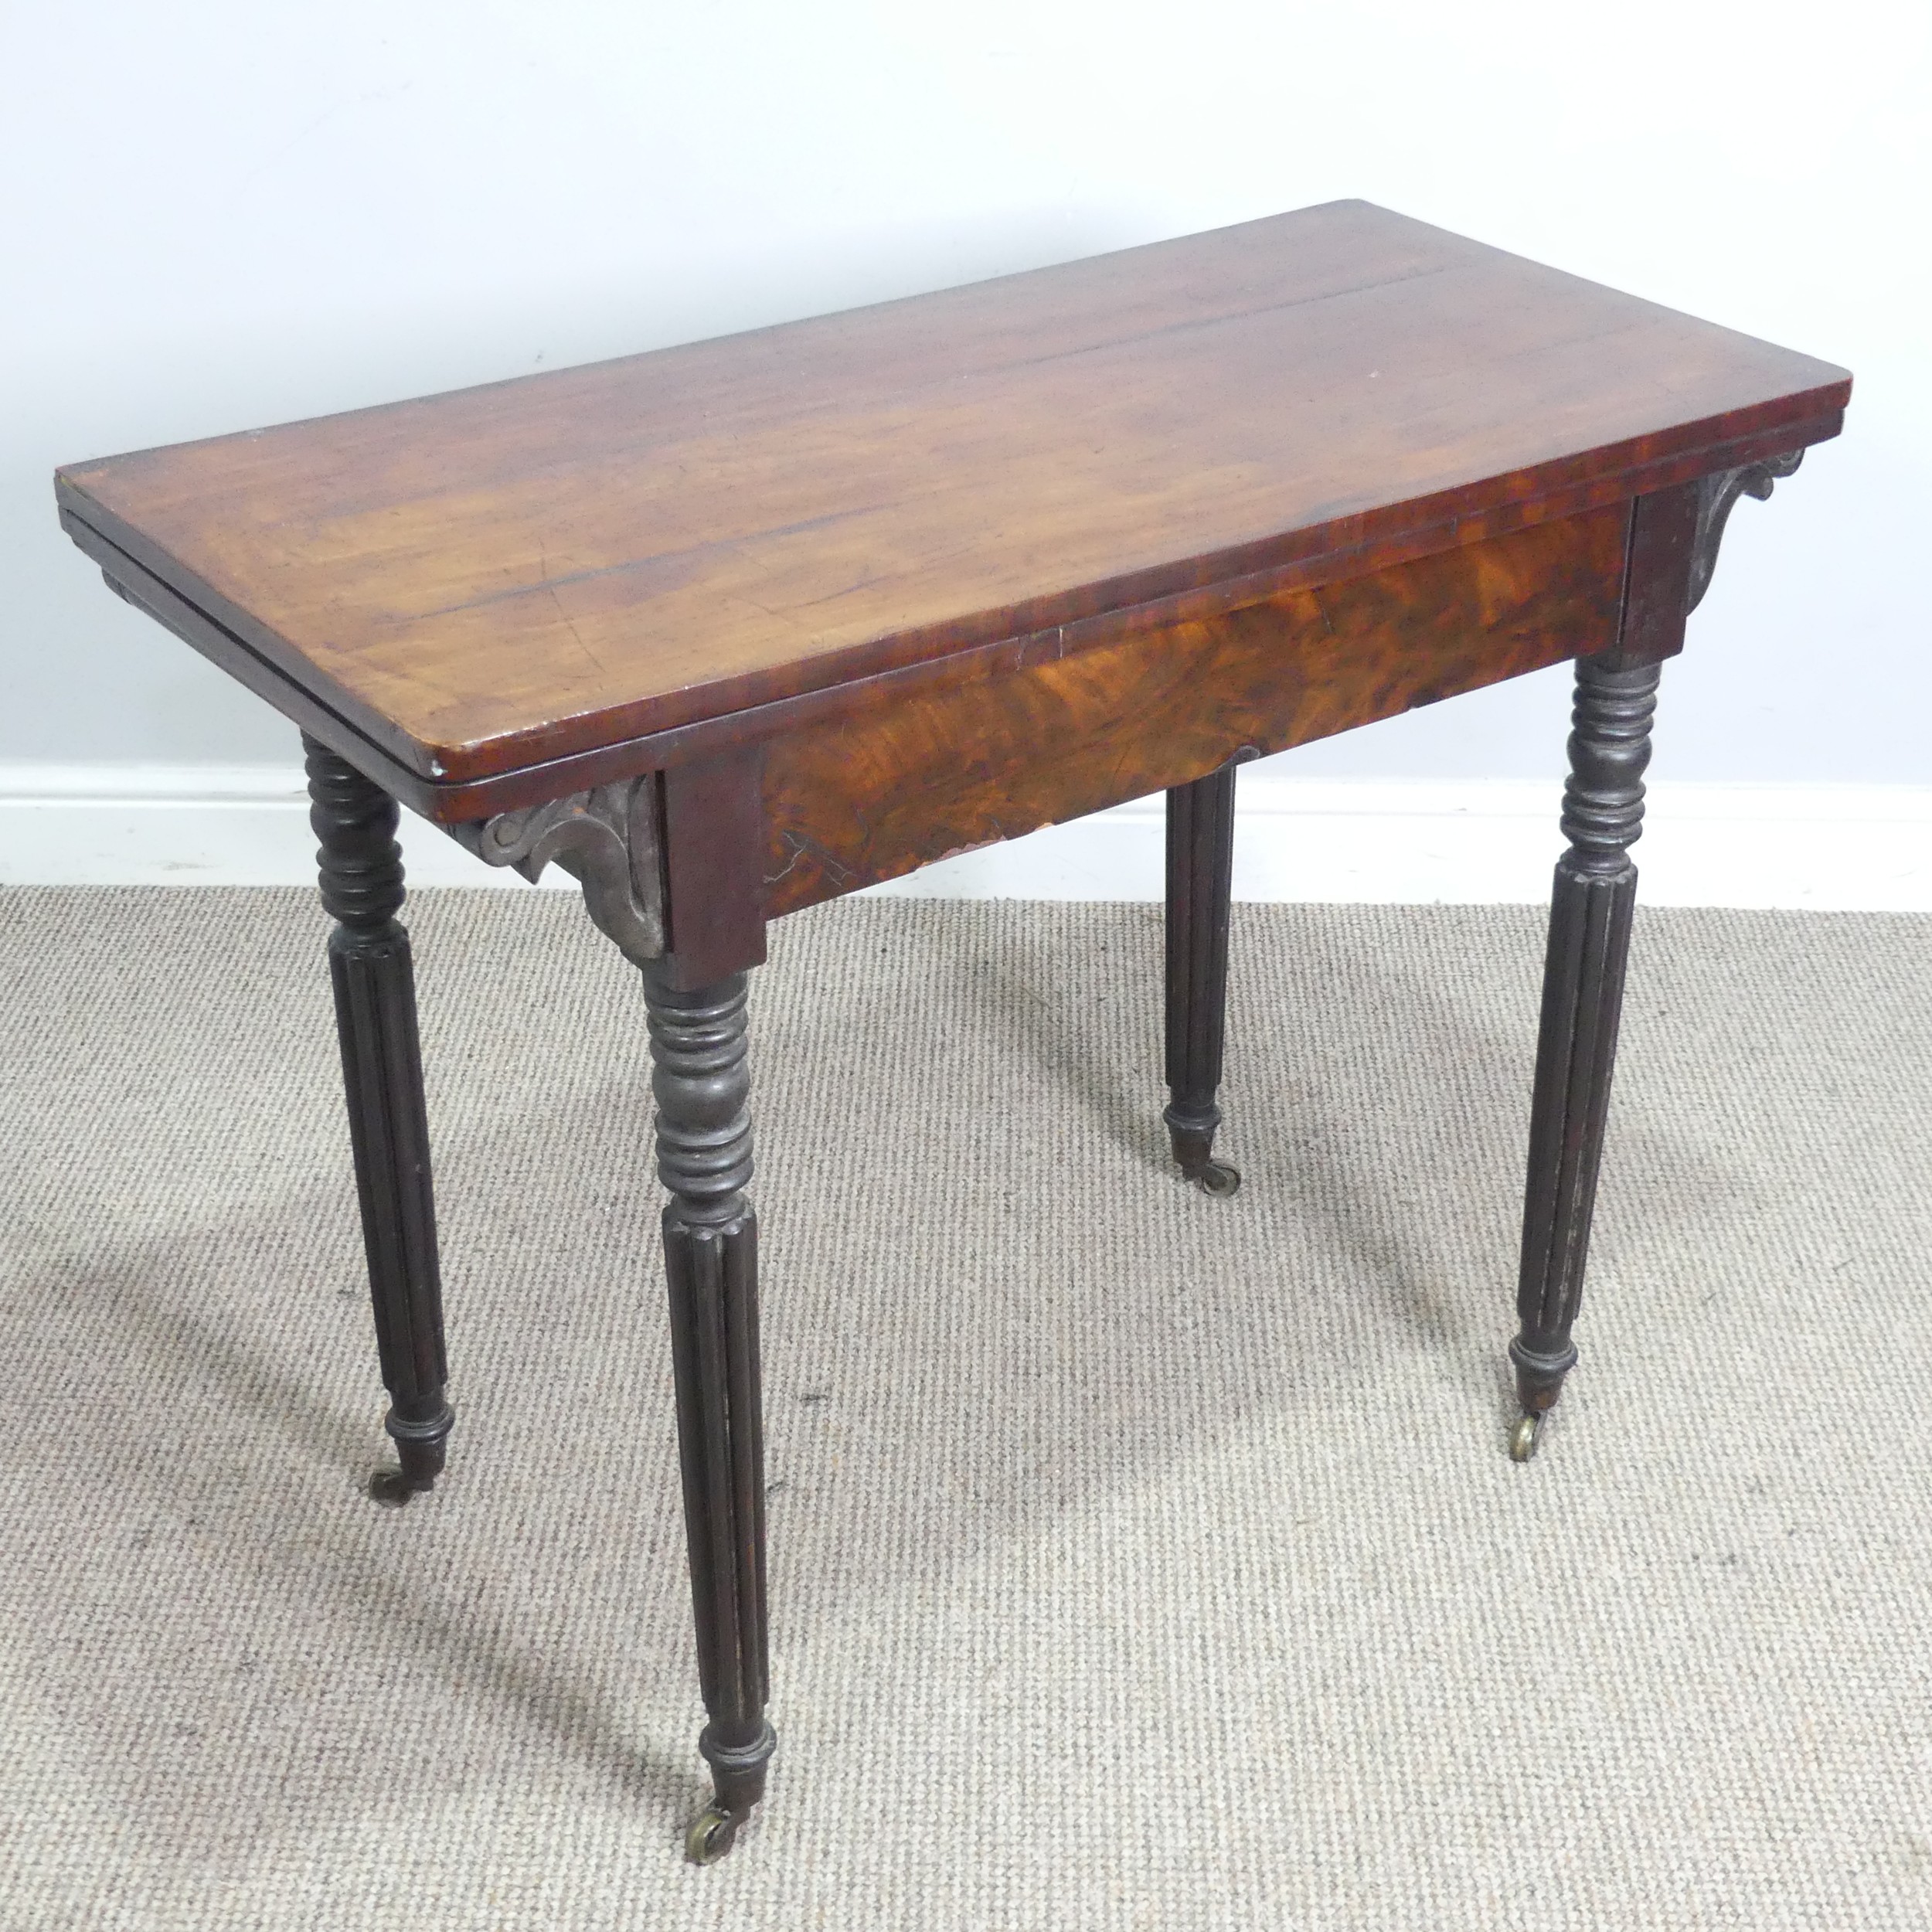 A Regency mahogany card Table, raised on reeded column legs and brass castors, W 91.5 cm x H 74 cm x - Image 5 of 7